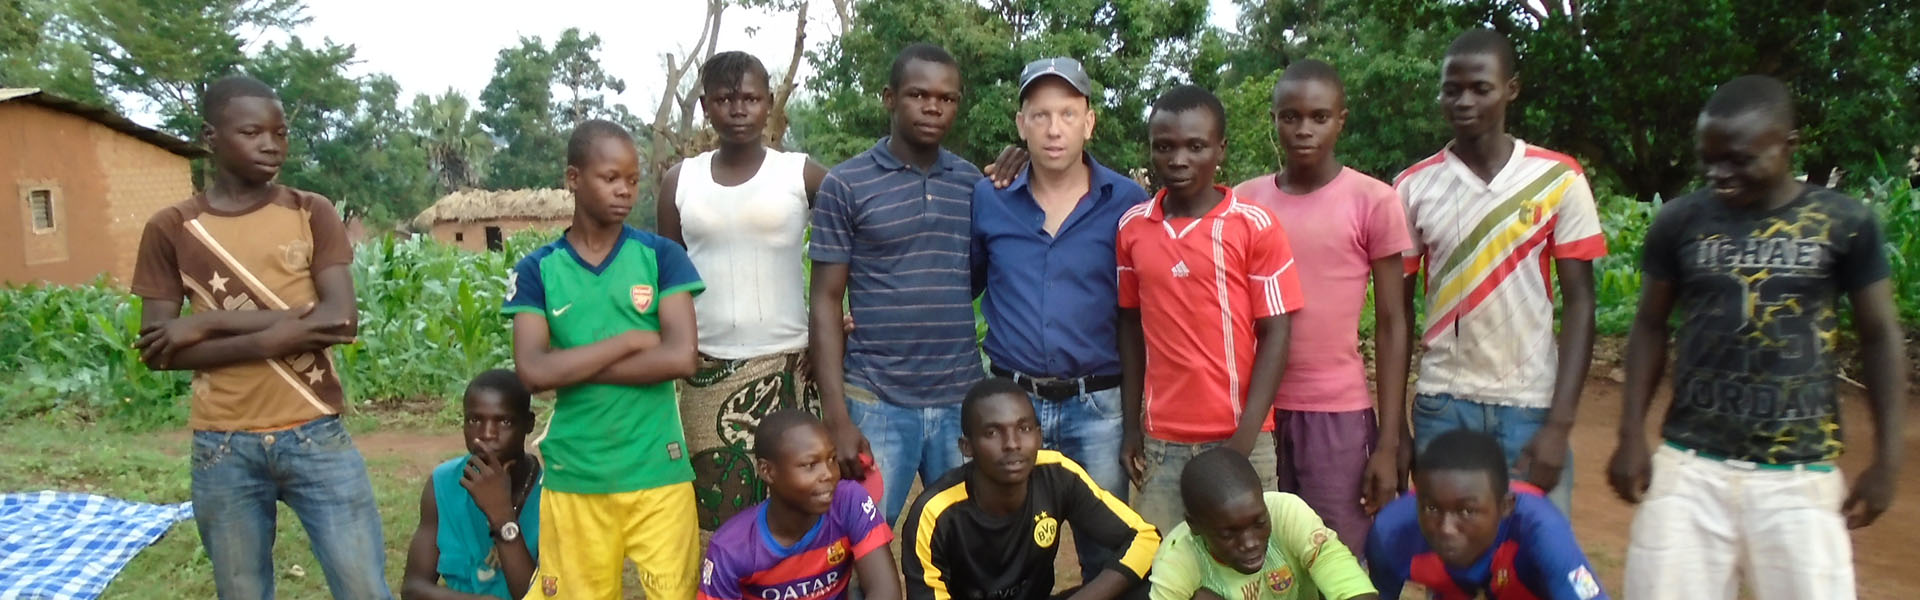 The JRS mission for reconciliation in the Central African Republic